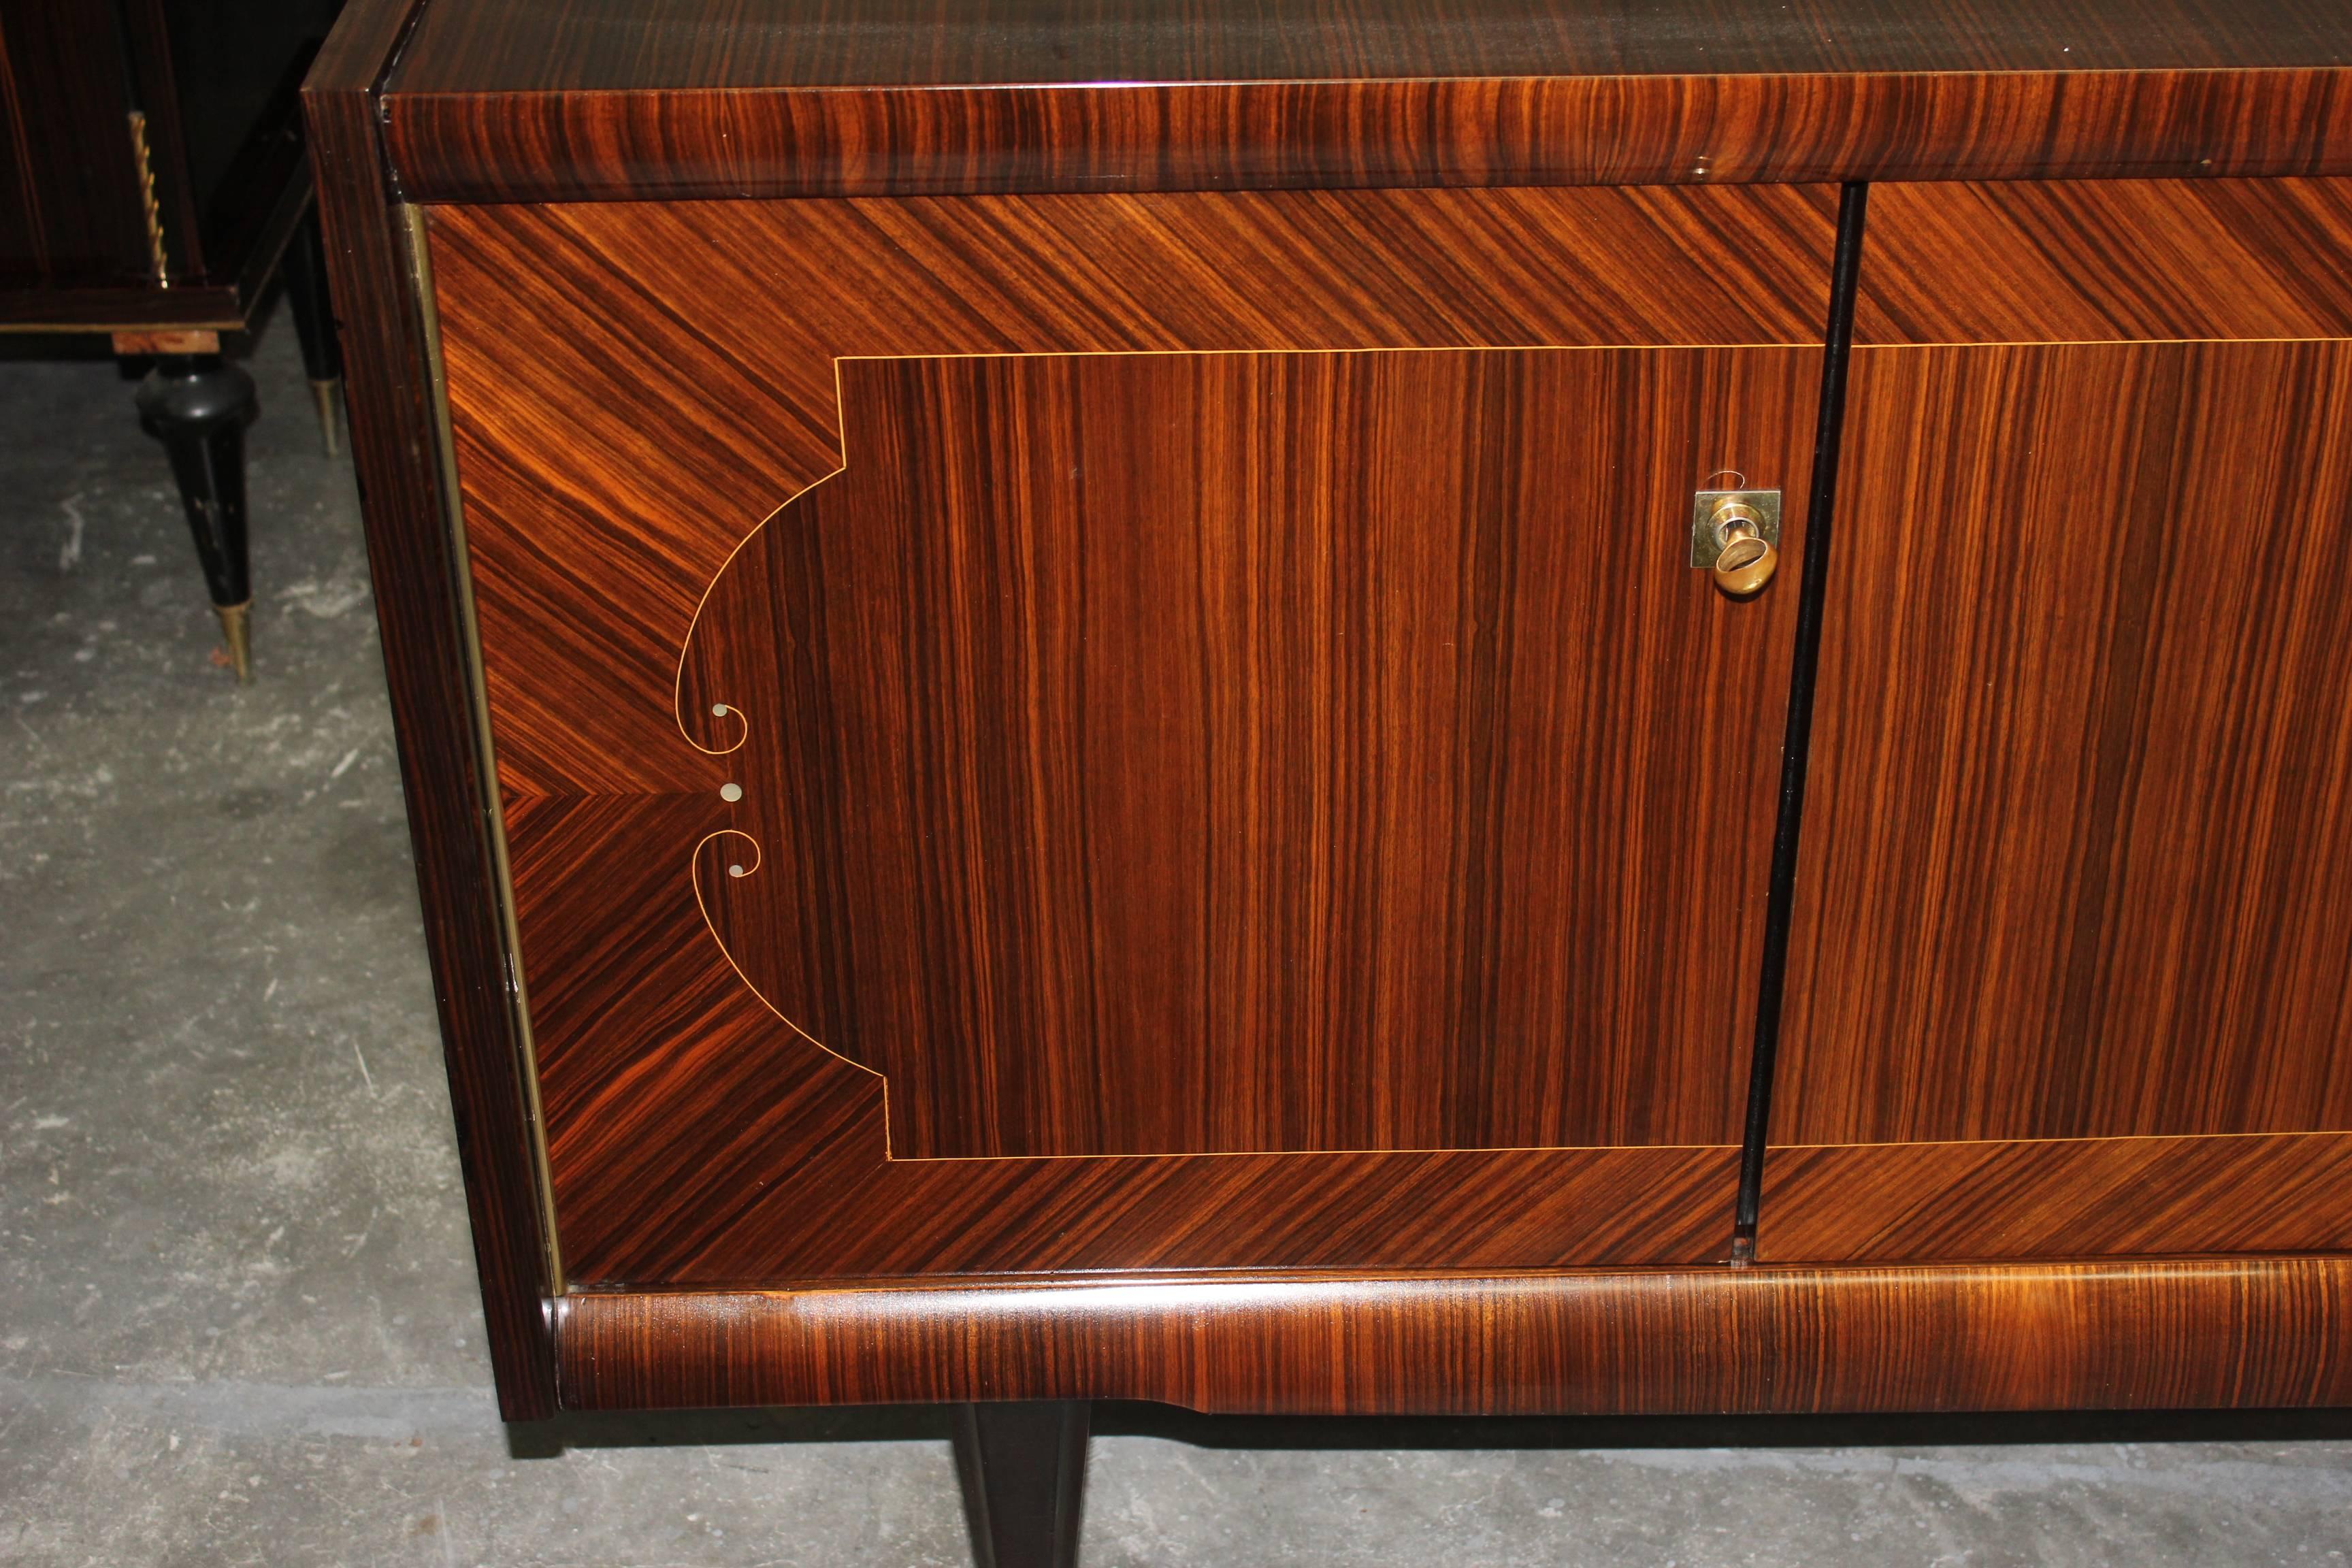 A French Art Deco Sideboard / Buffet Macassar ebony with M-O-P detail ,circa 1940s. High gloss finish and Finished interior.